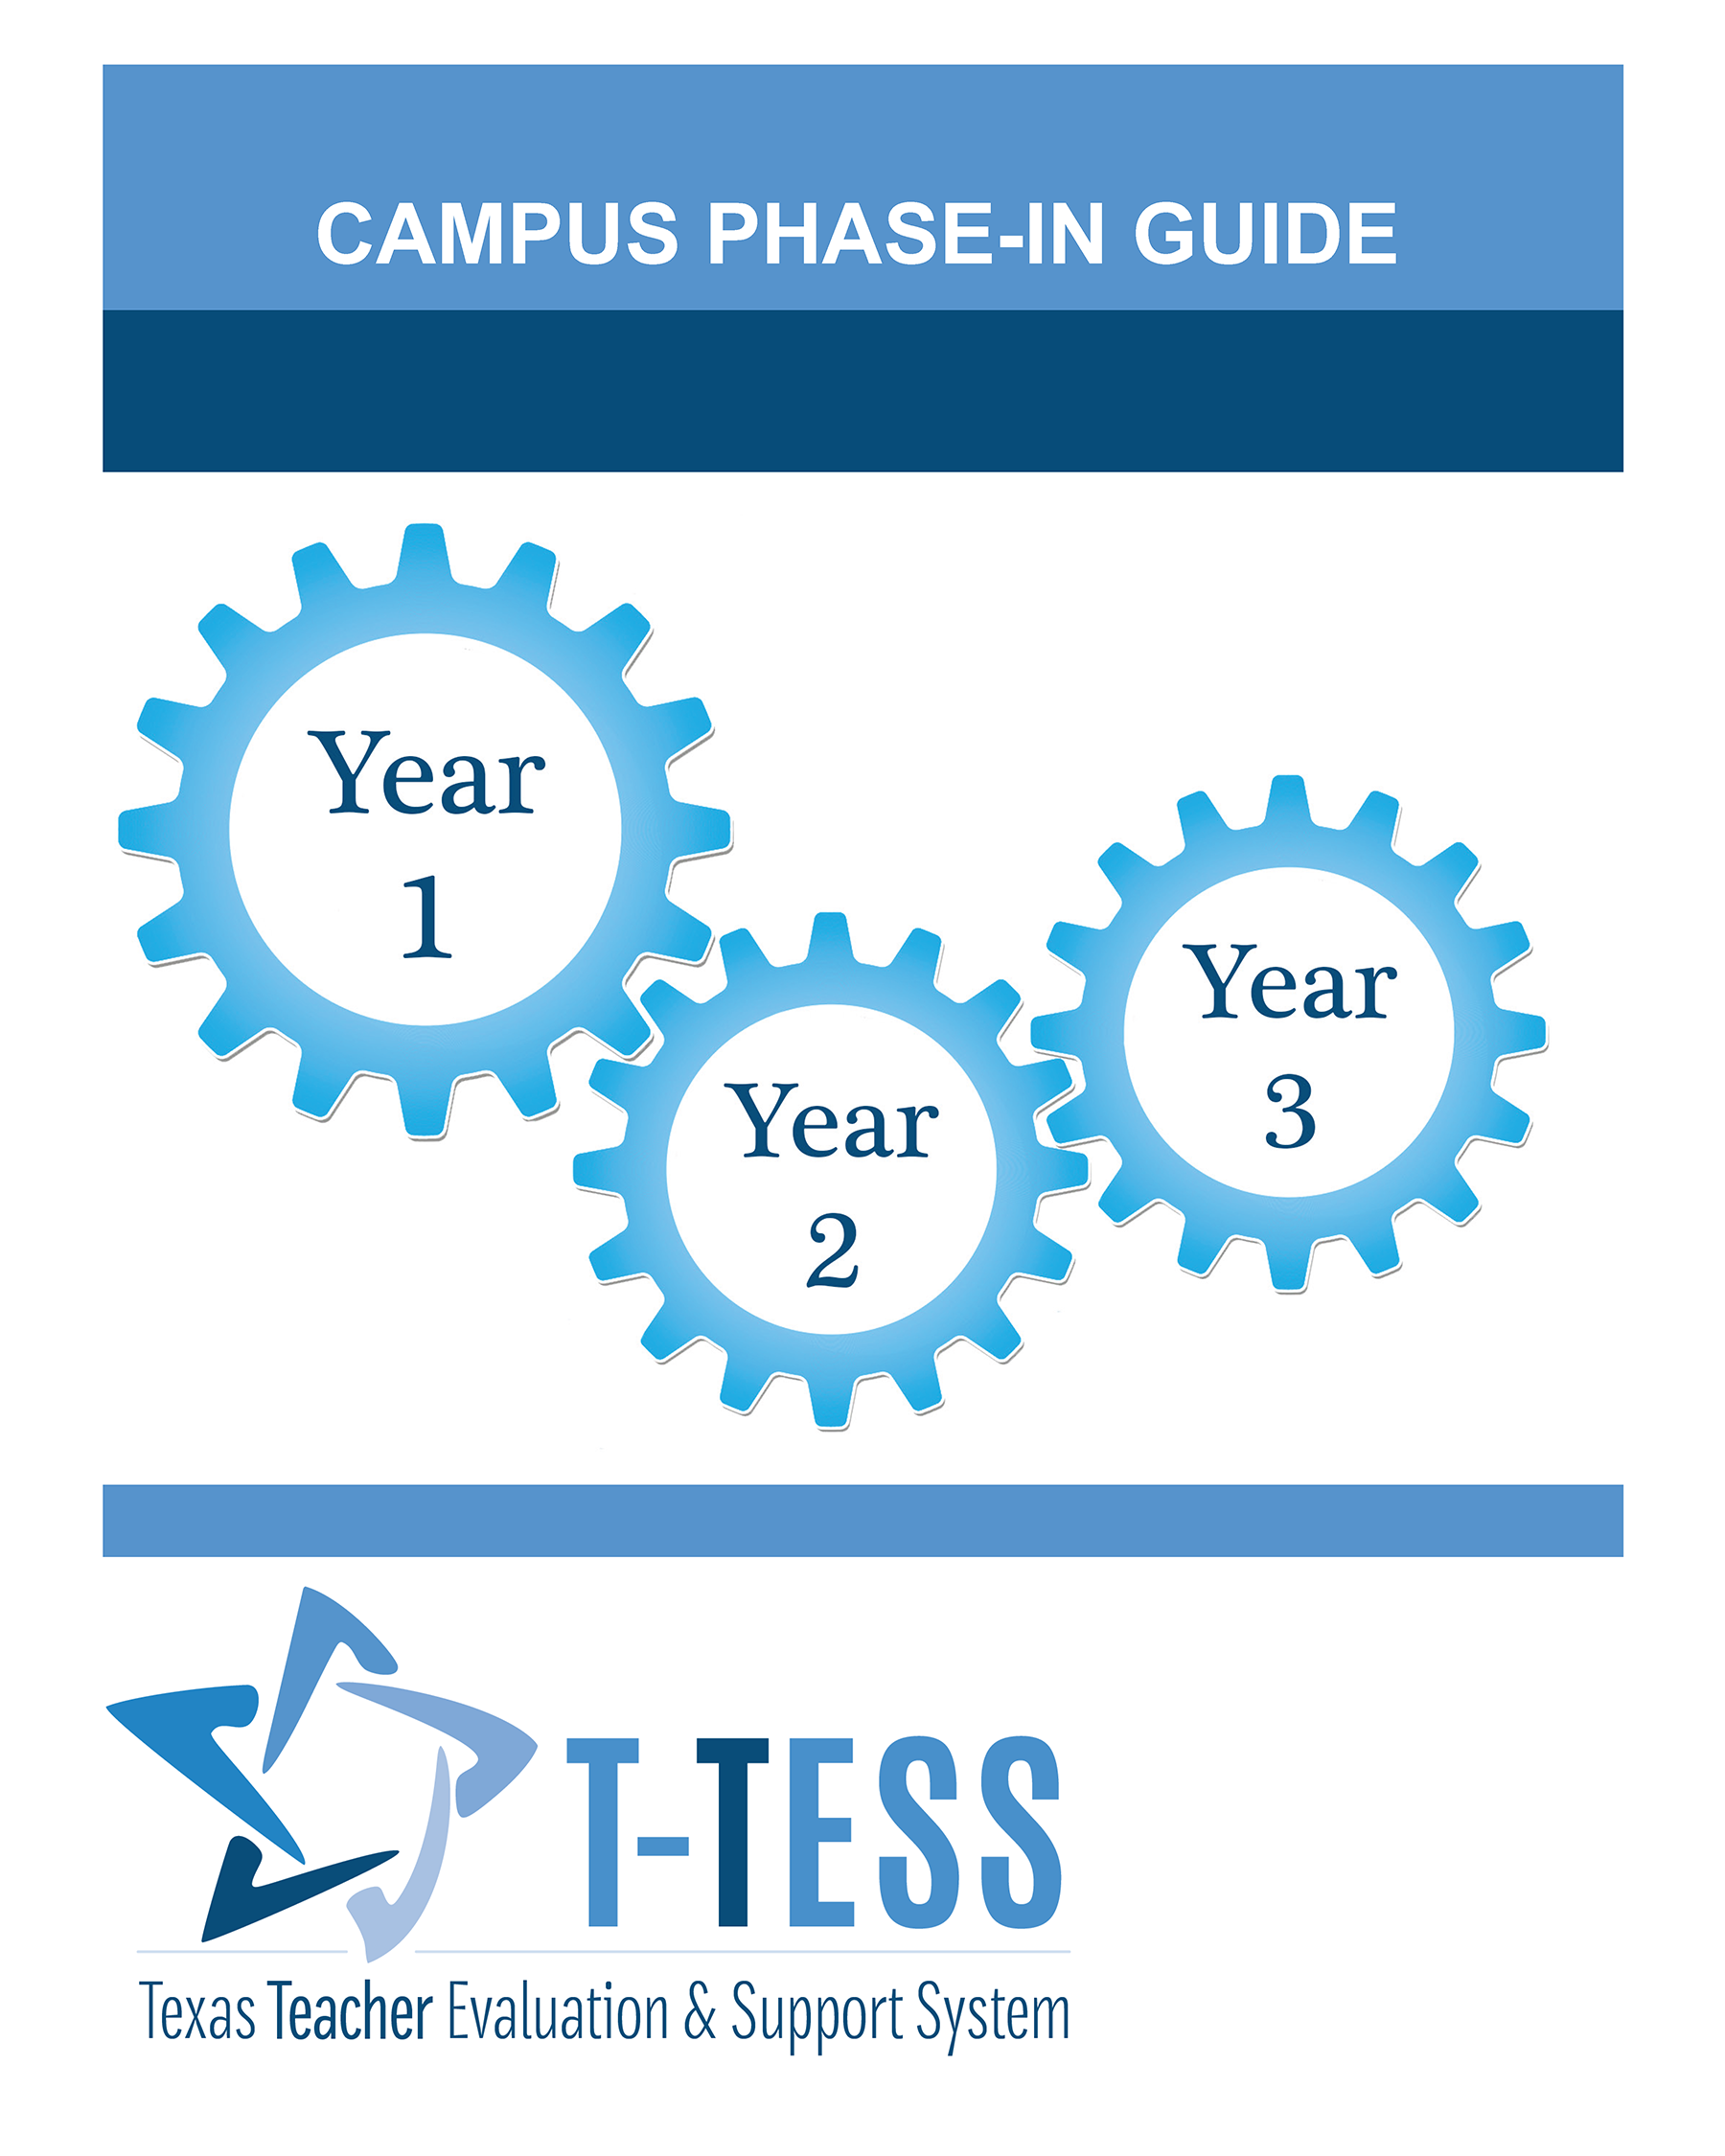 Campus phase in guide